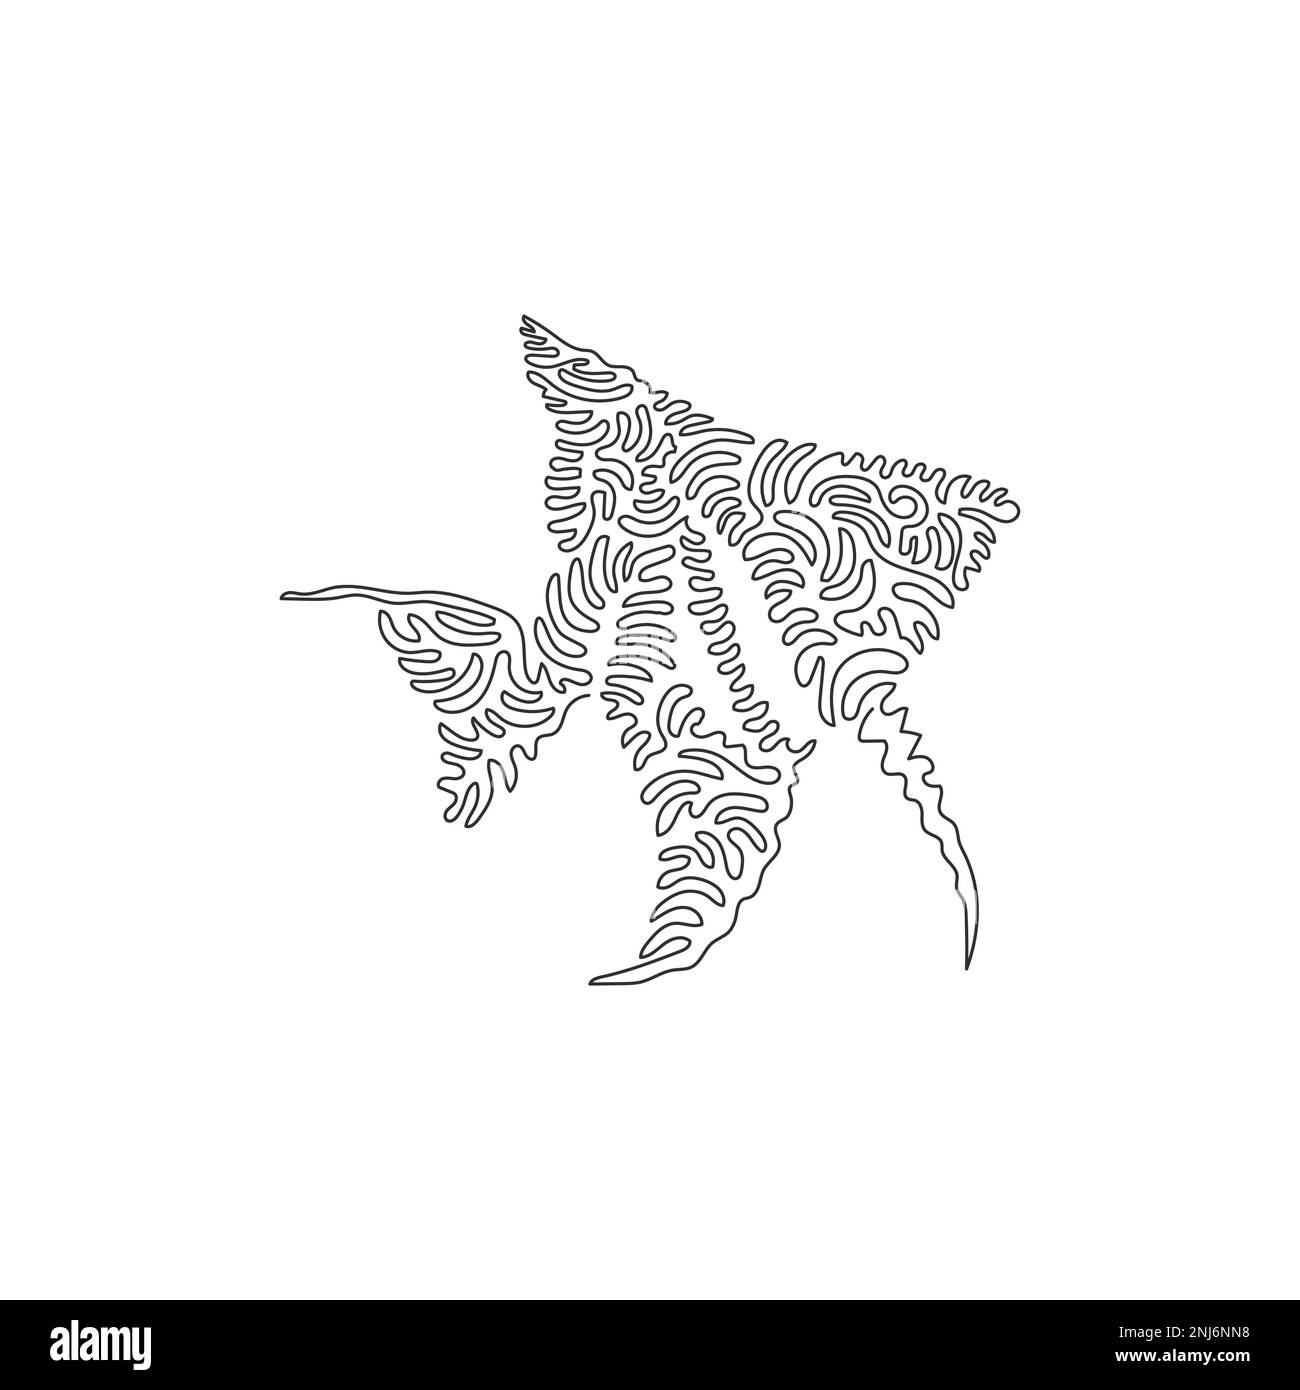 Single curly one line drawing of unique shape angelfish abstract art. Continuous line drawing design vector illustration of adorable angelfish Stock Vector